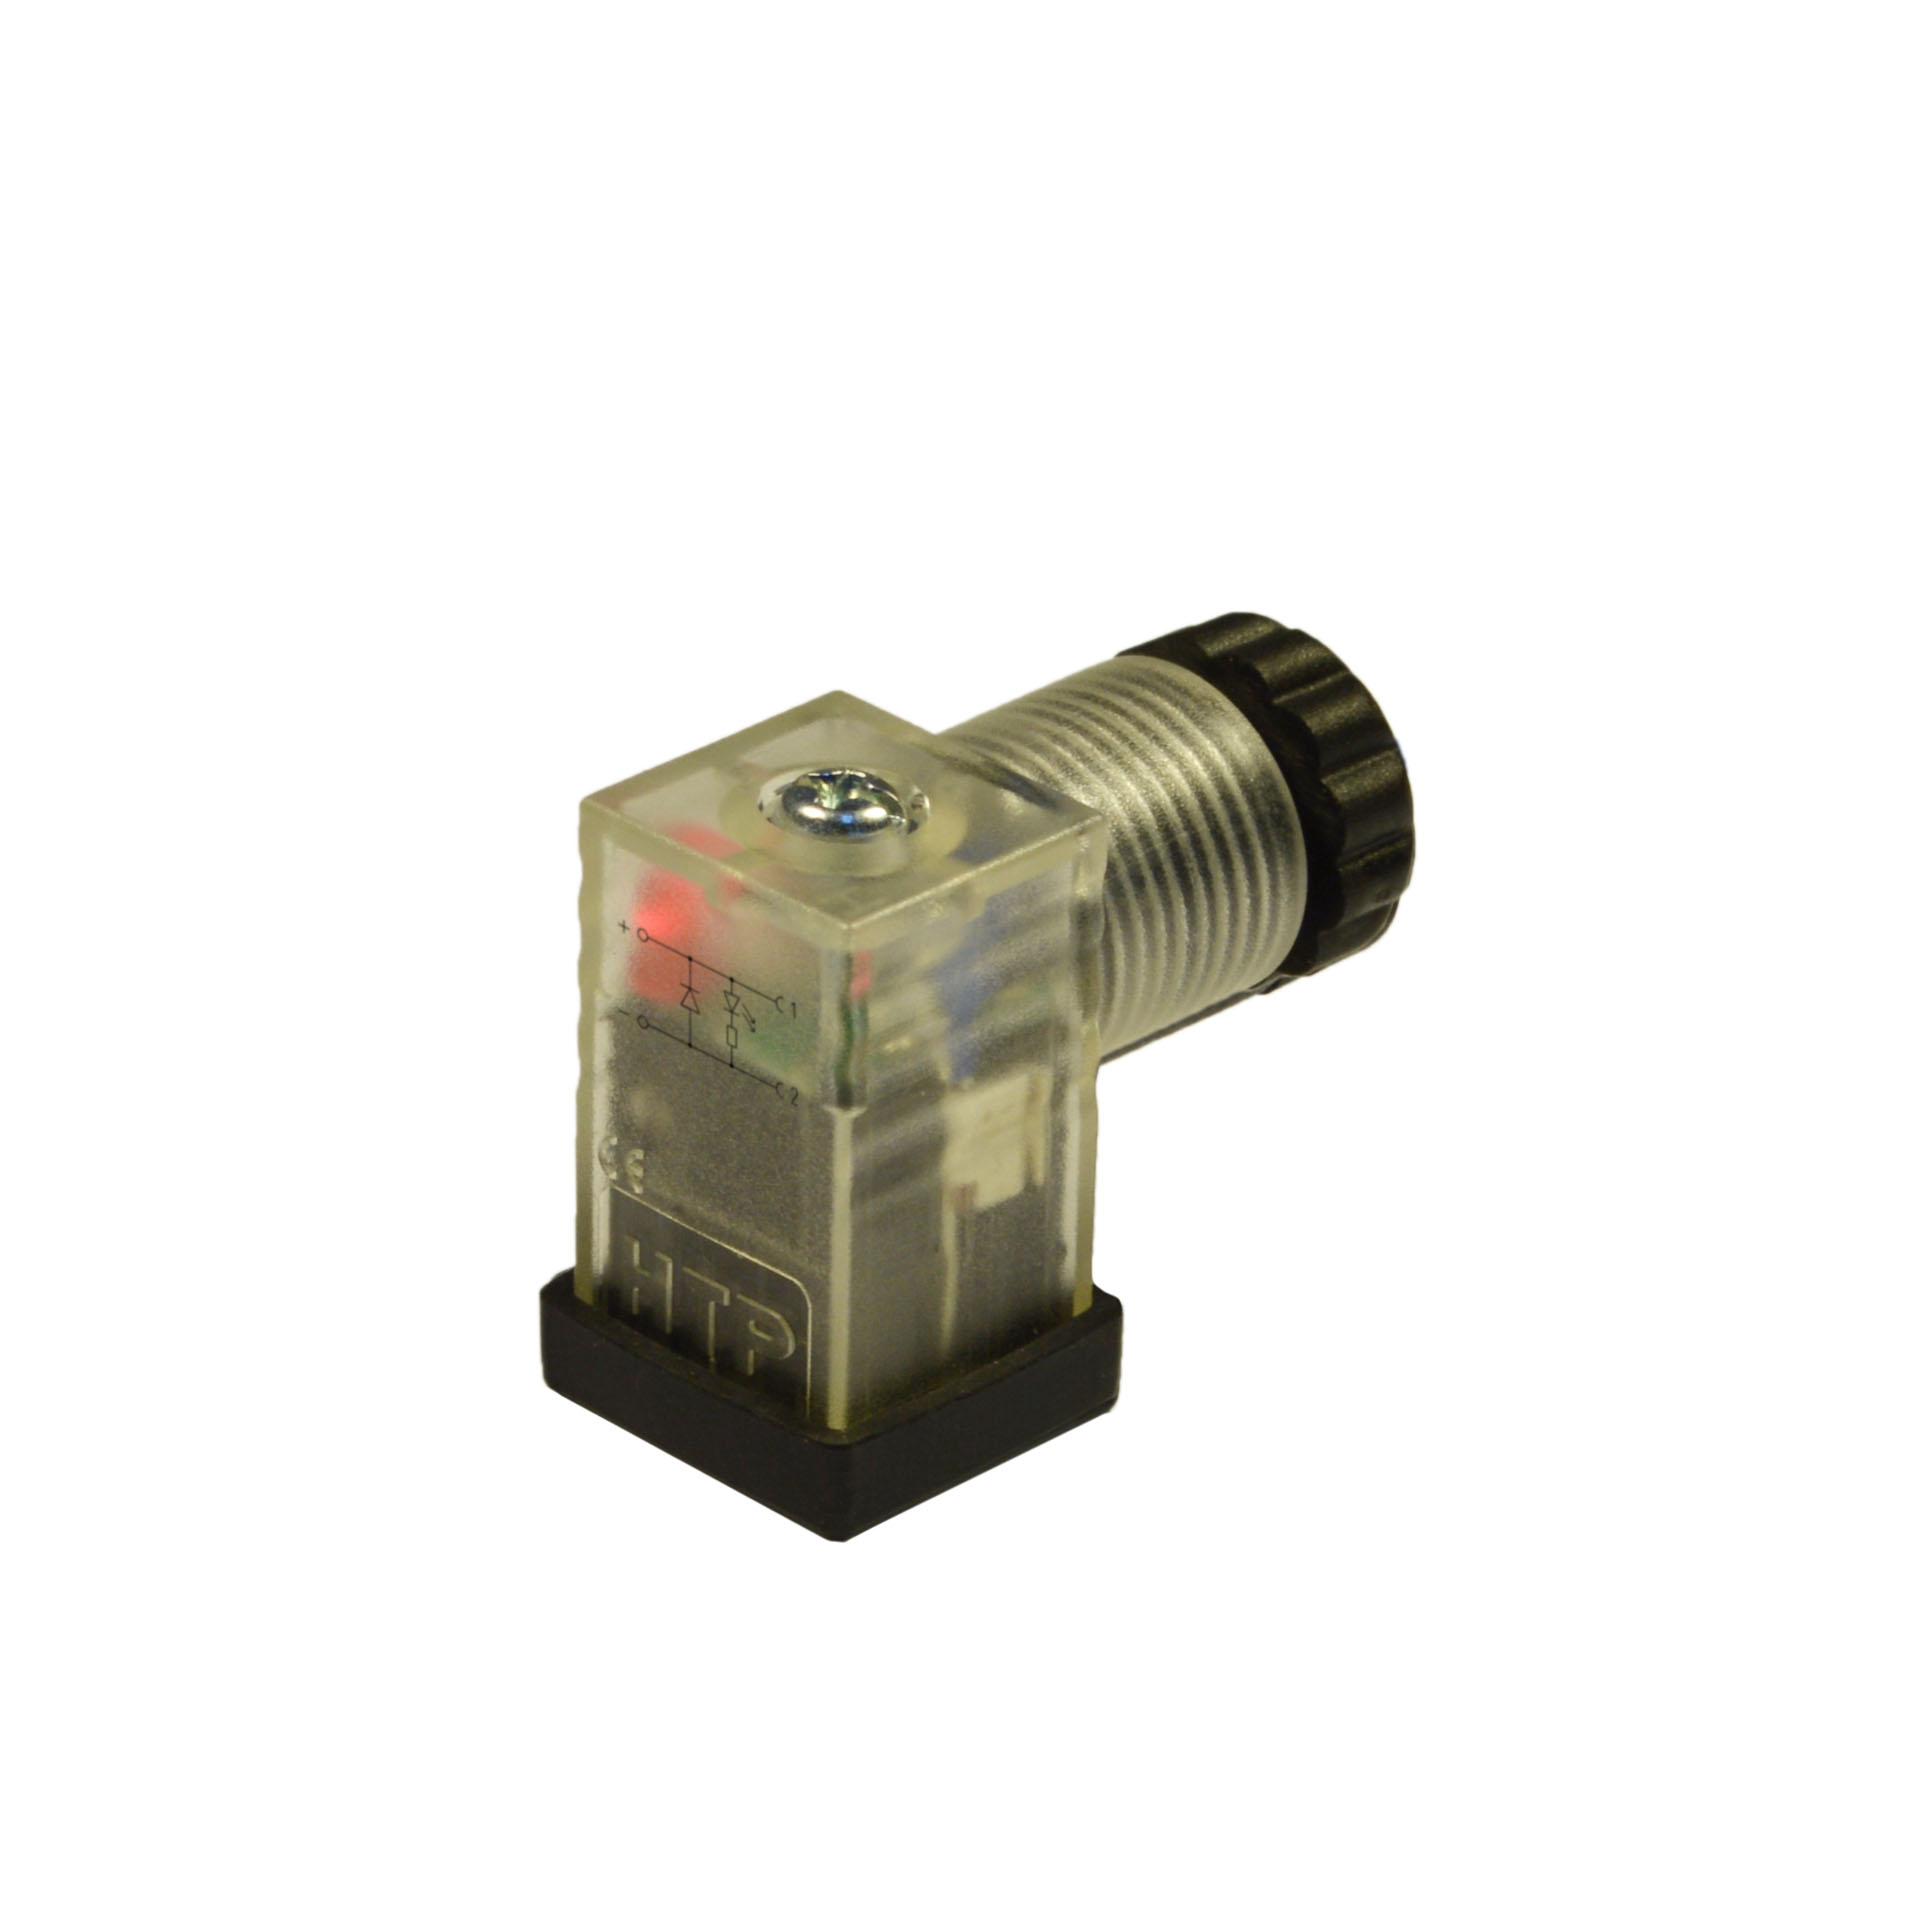 Industrial standard(typeC)field attachable,2p+PE(h.6),red LED+diode,115VDC,PG7